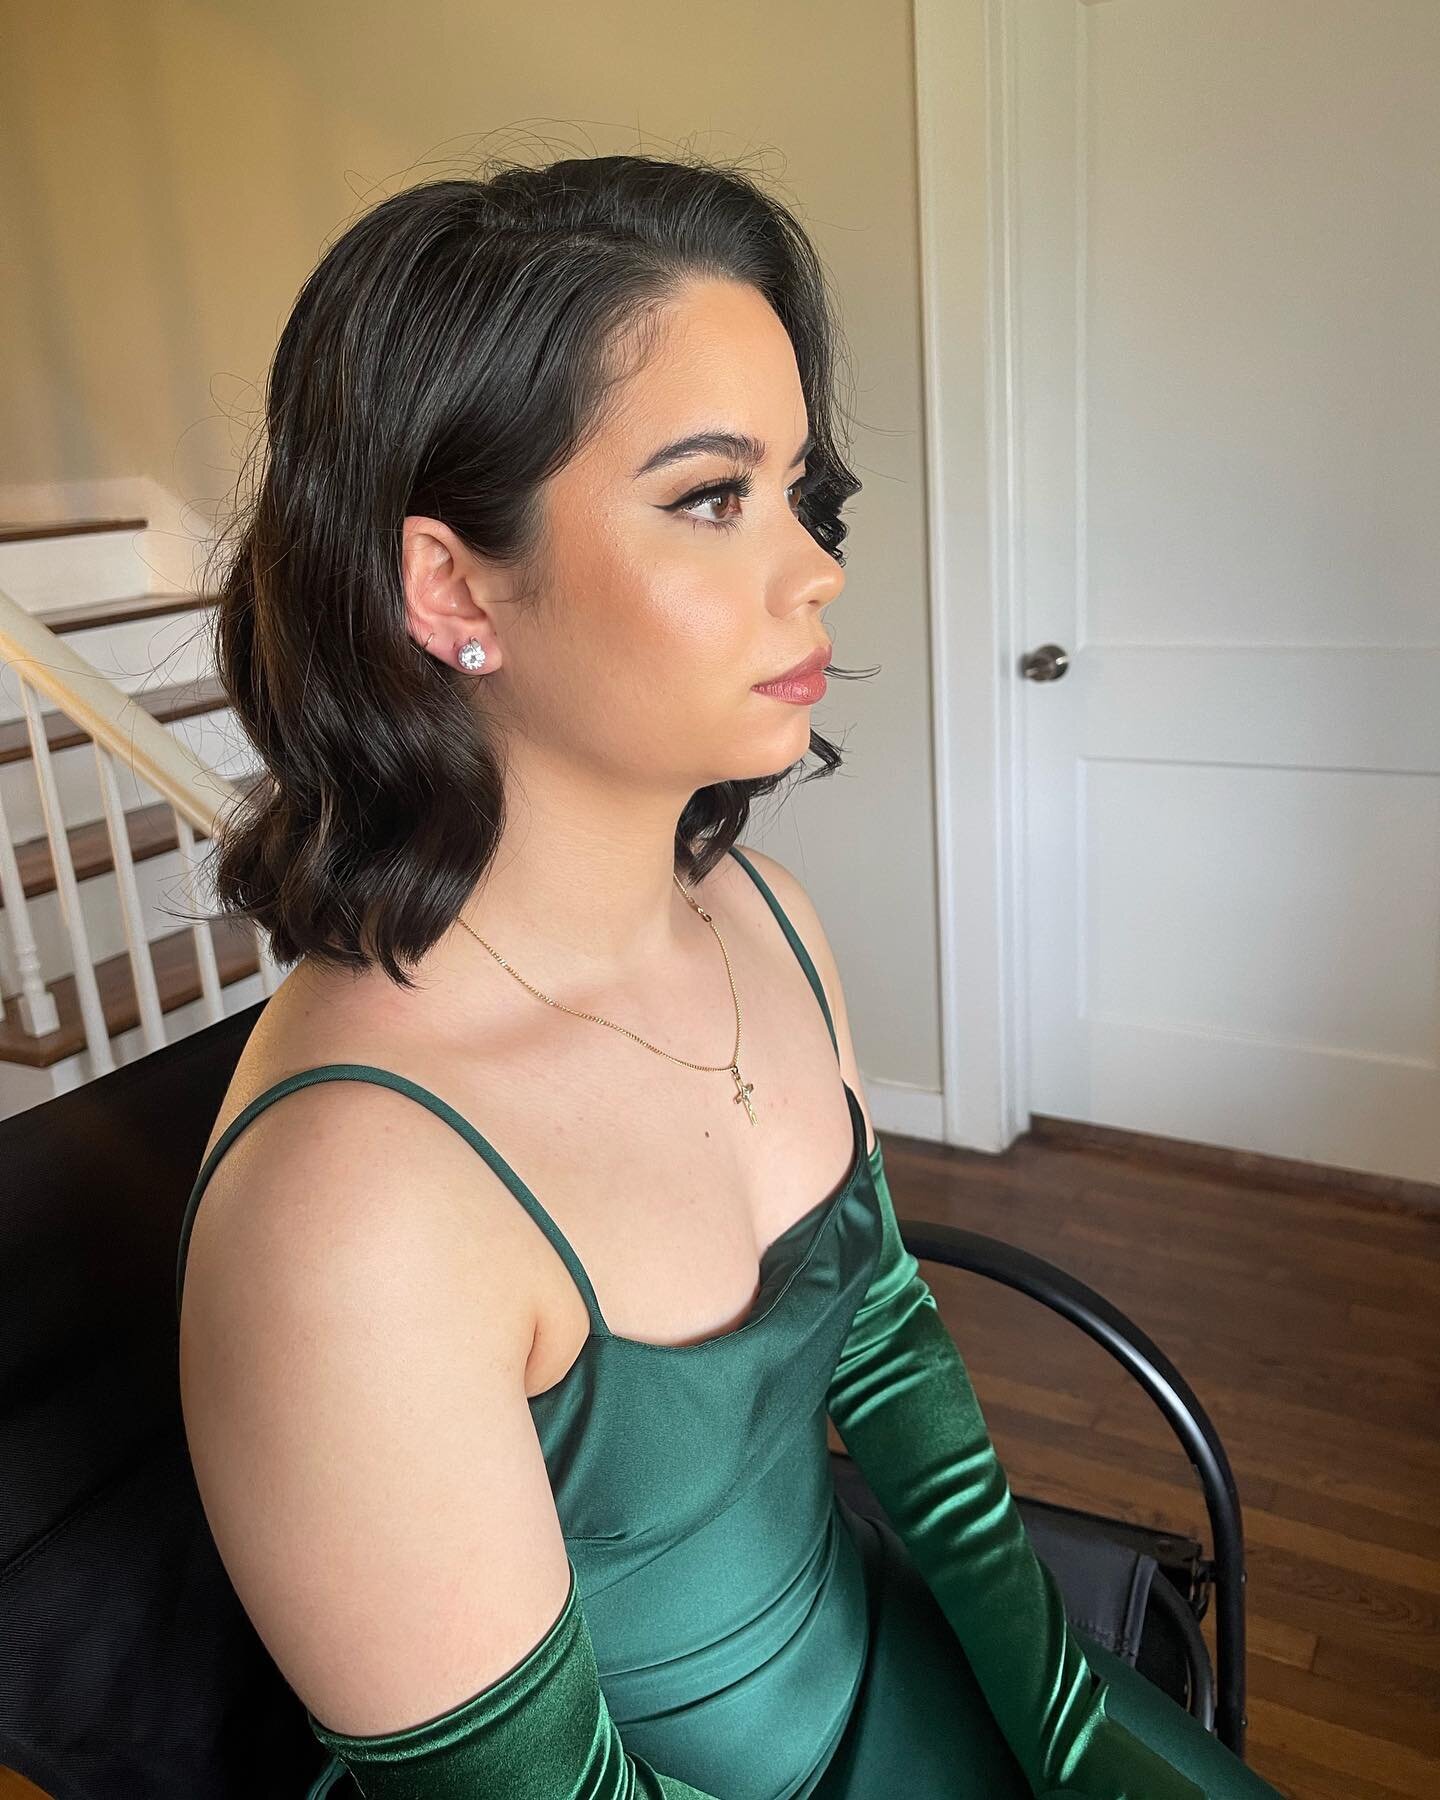 We love a good glam on the maid of honor 😍
Matte eyes, winged liner, and plump skin is always a winner!
.
2022 is 80% booked 🙏🏽we are now booking for 2023, don&rsquo;t wait long in securing your beauty team! Reach us via email (link in bio) so we 